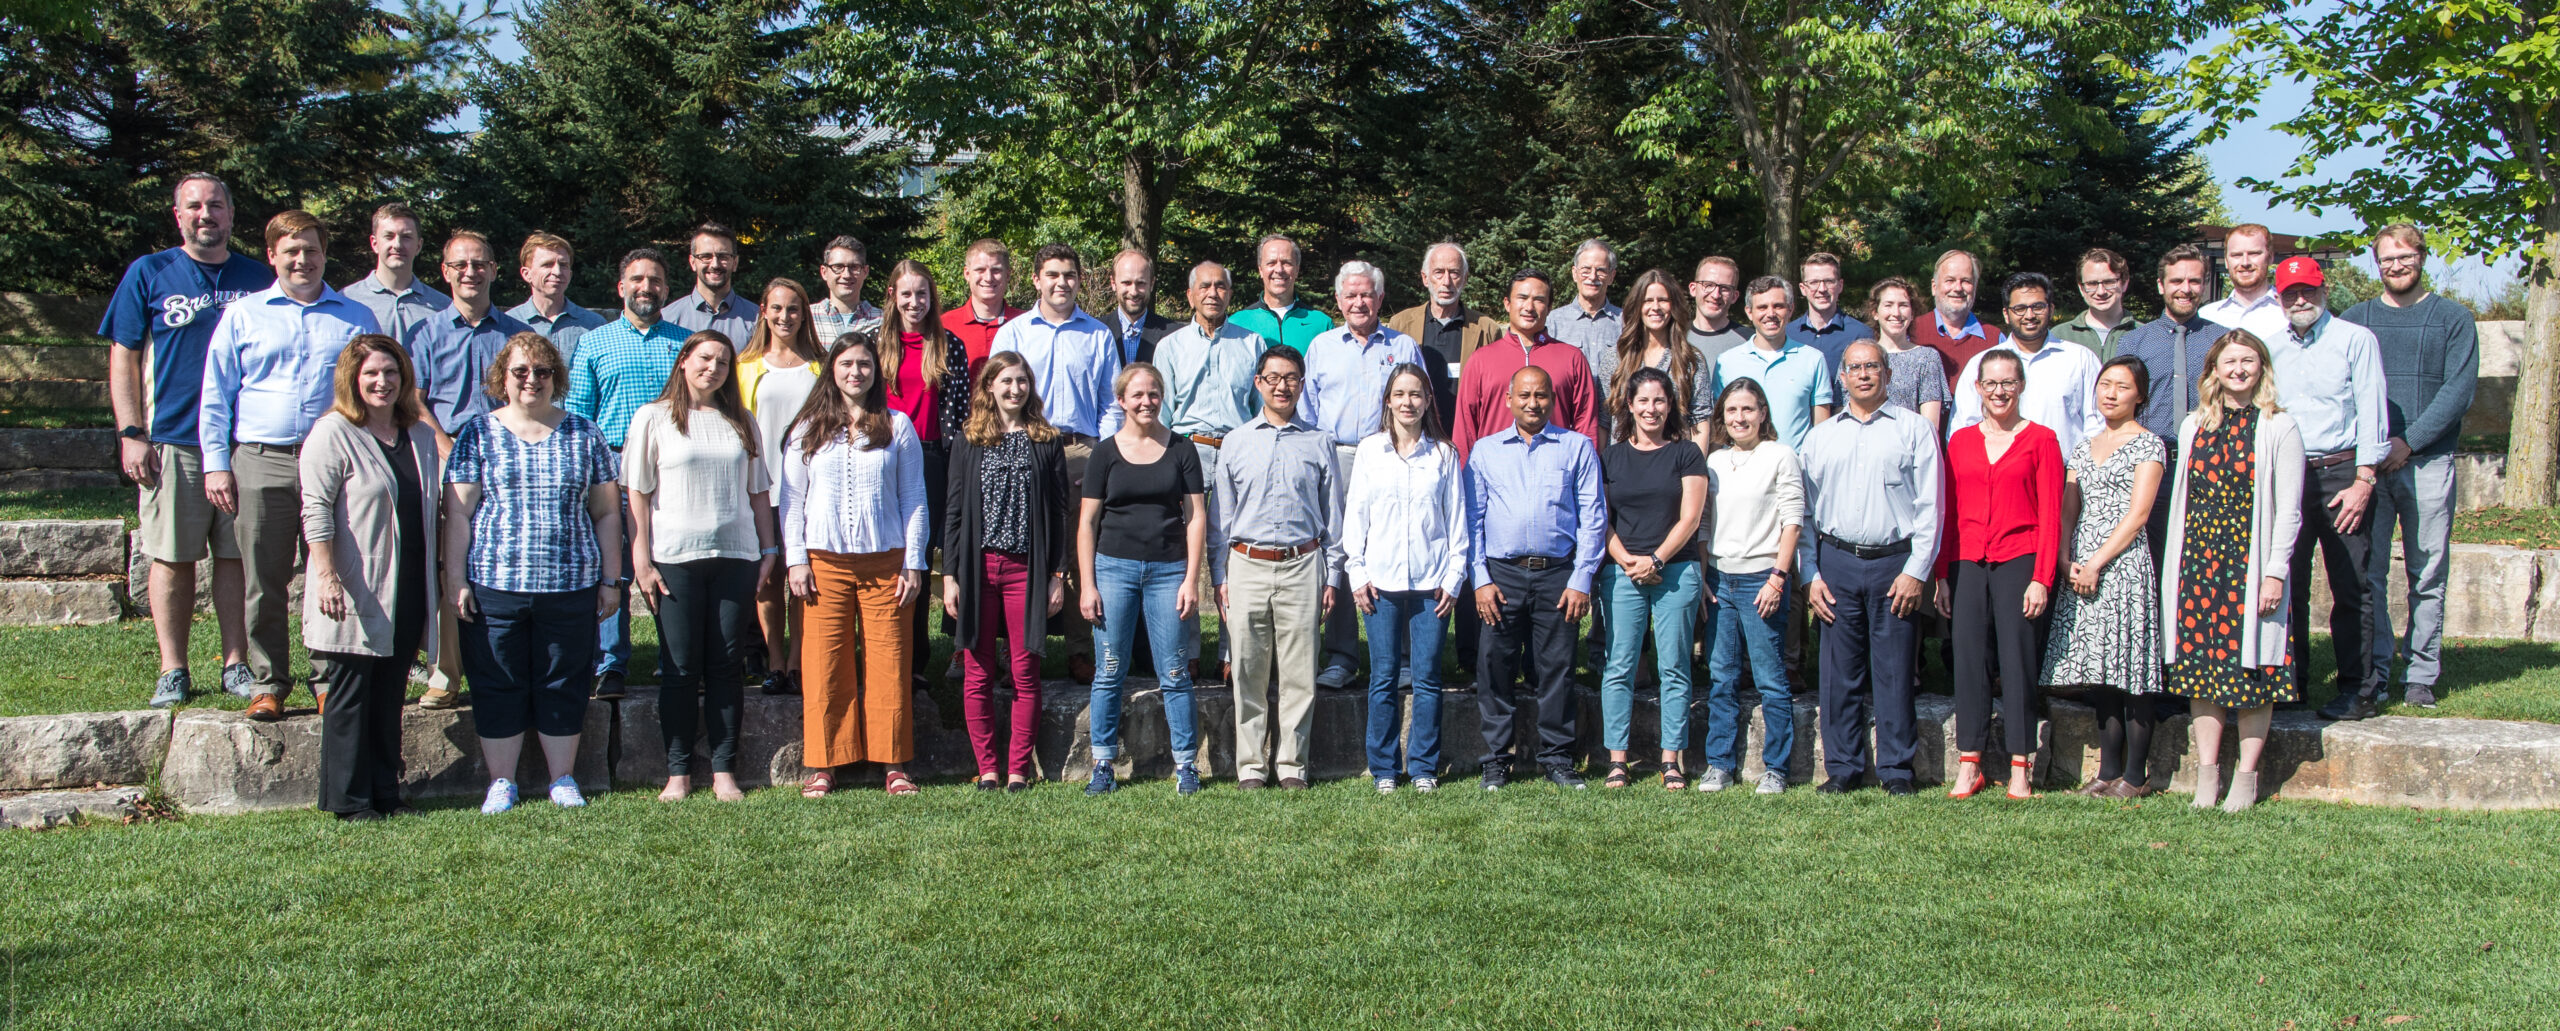 outdoor group photo of attendees of the 2021 Department of Human Oncology Research Retreat